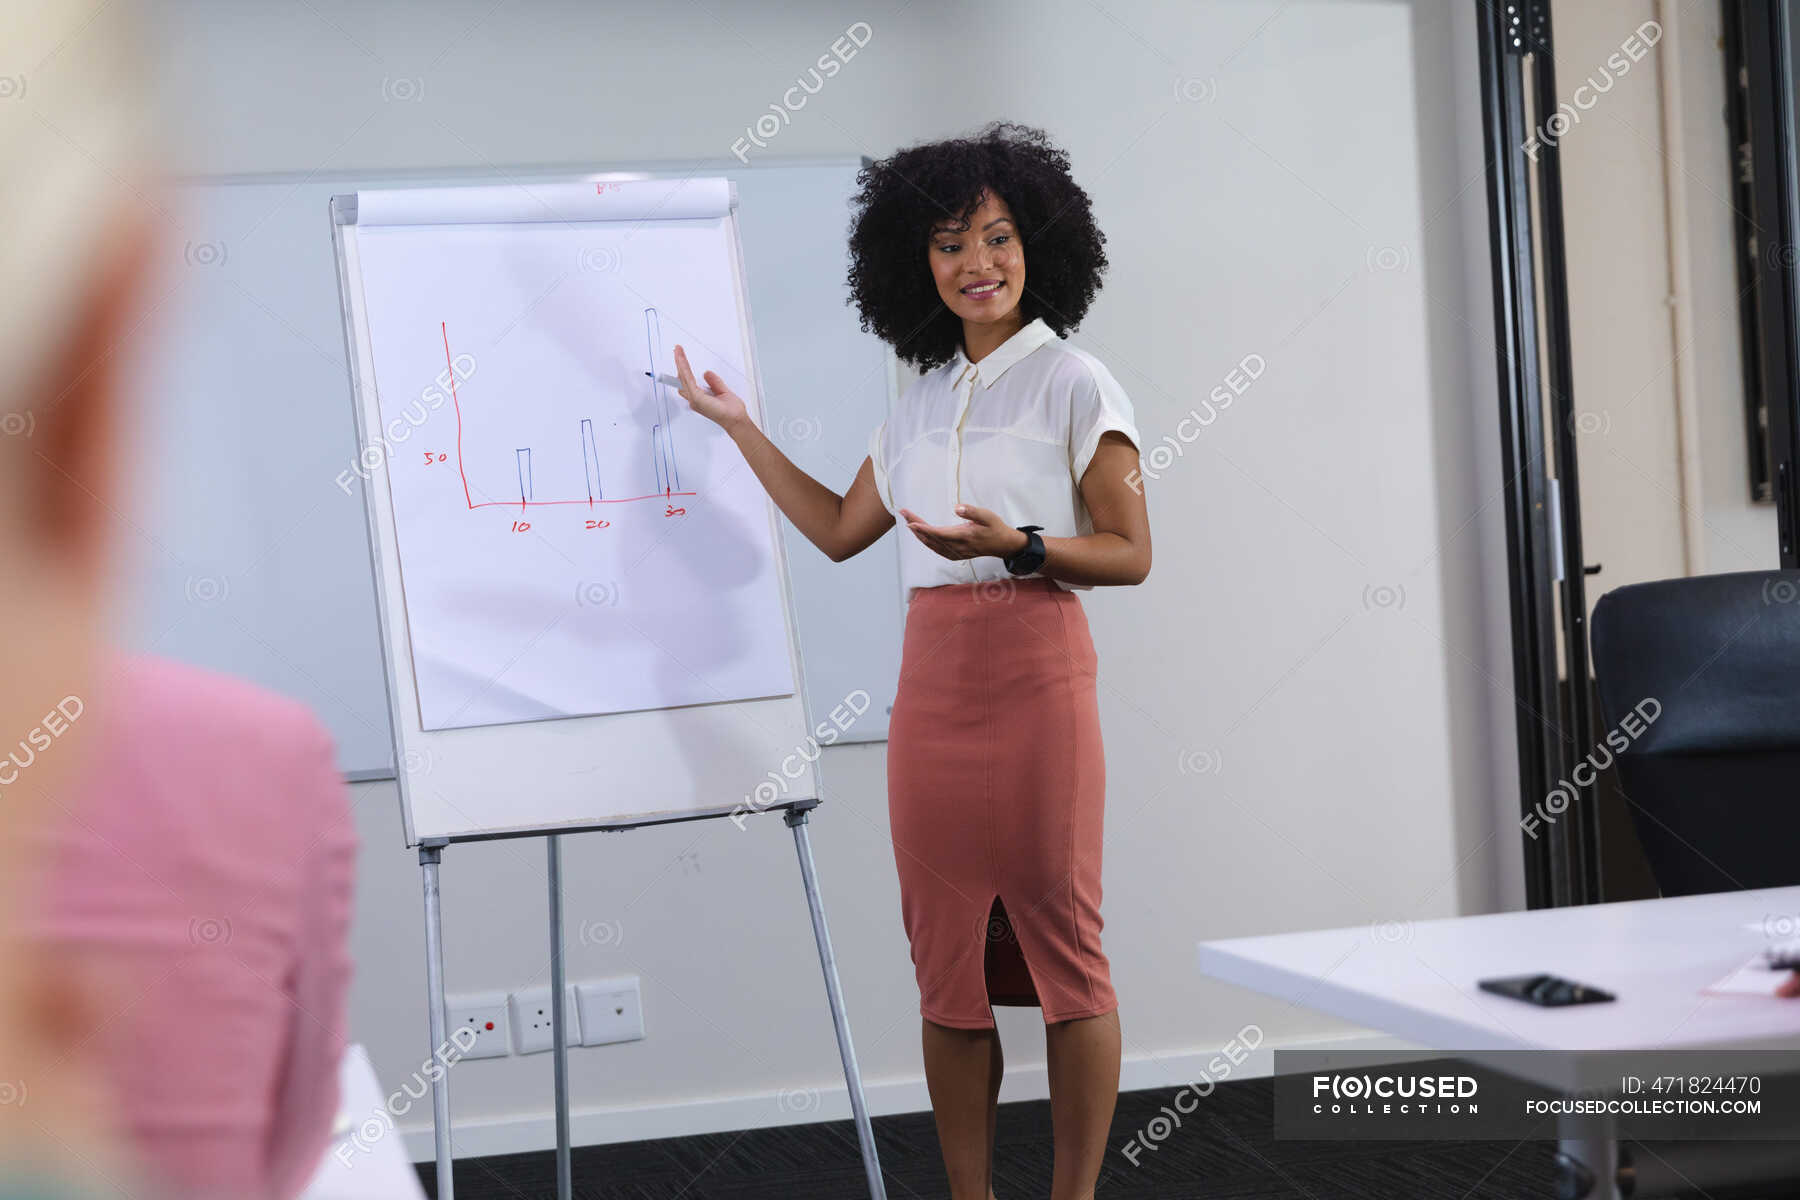 lucinda is giving a presentation to her manager